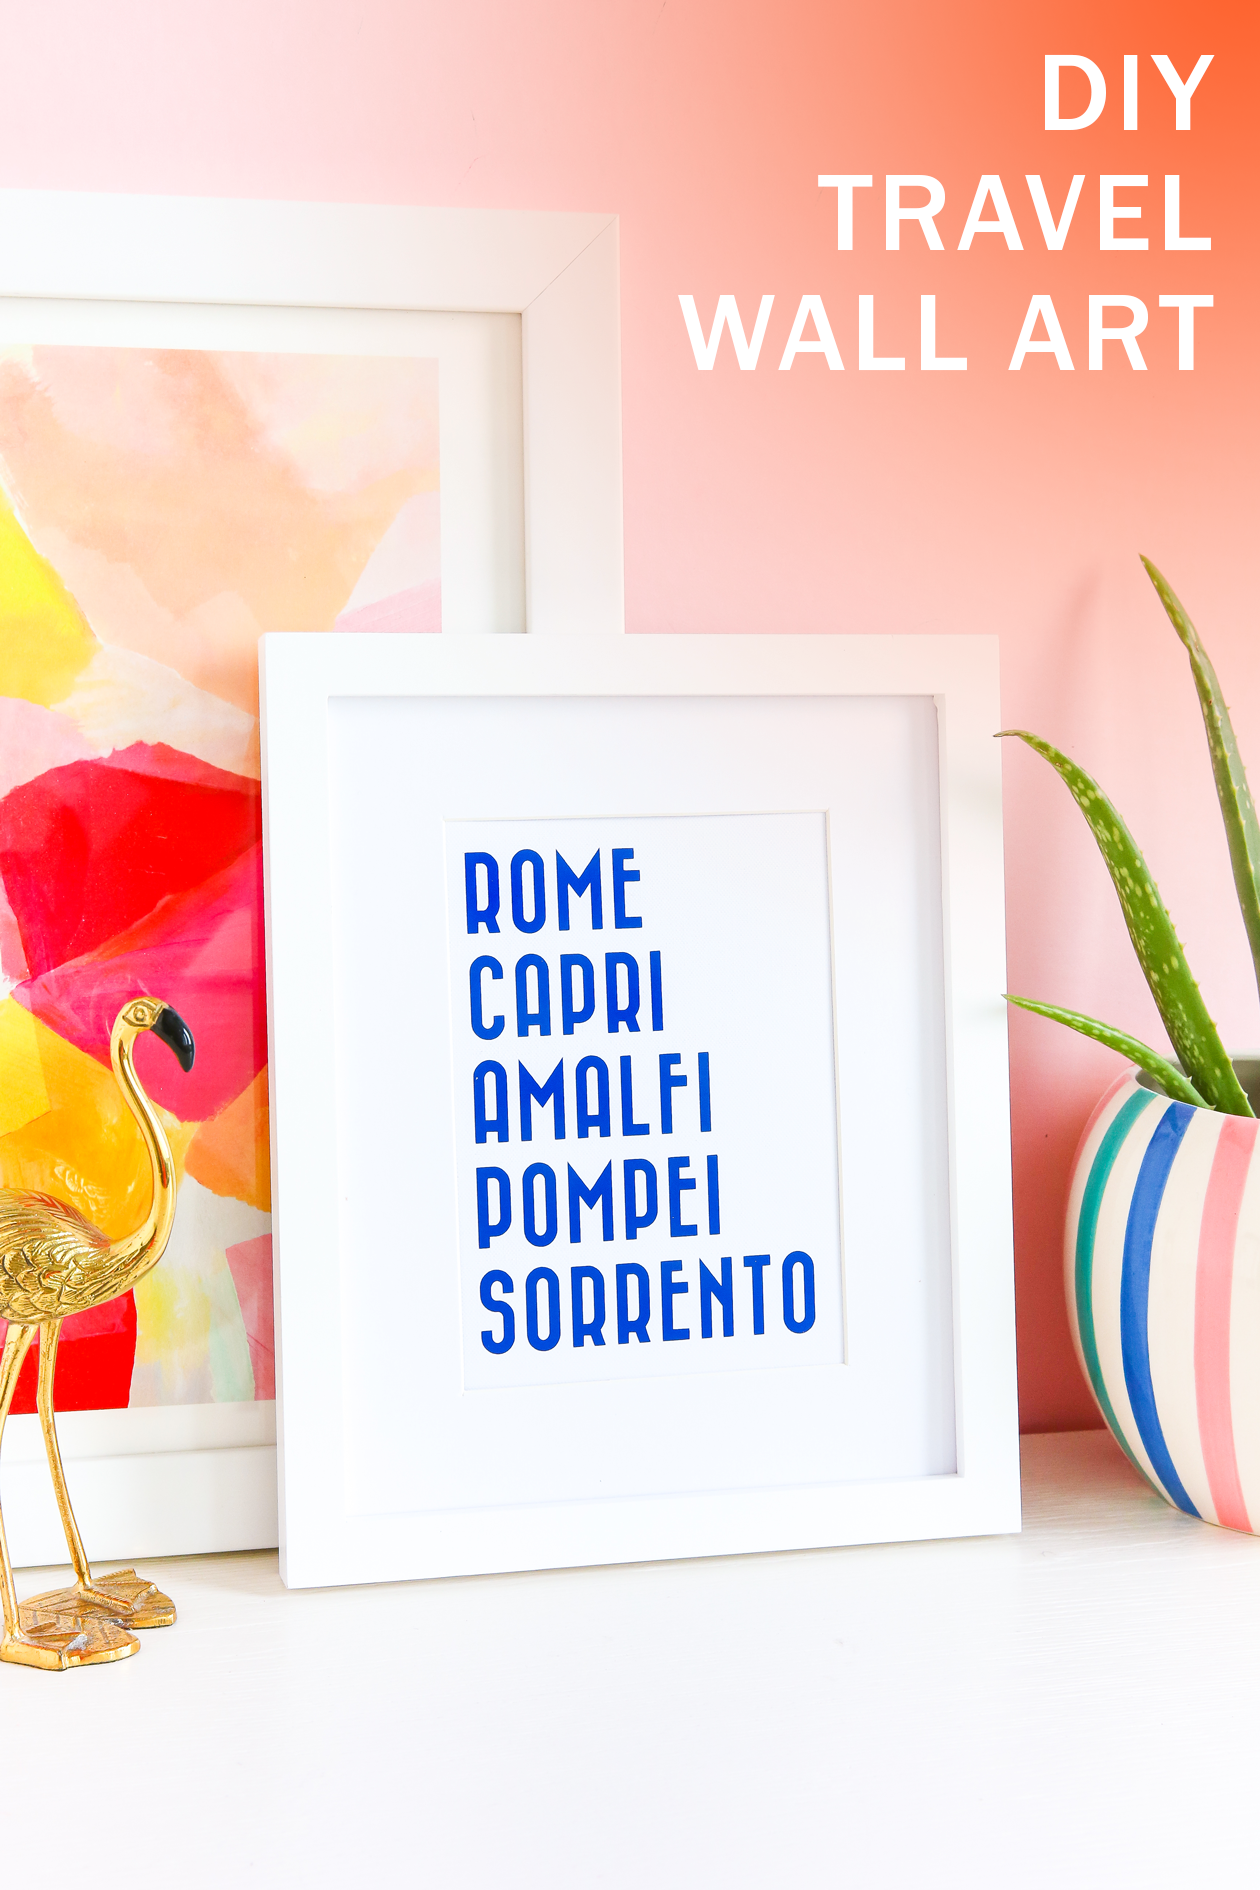 Make this DIY Travel Wall Art in a few minutes with your Cricut! This is great project to remember a special trip or your honeymoon. DIY Wall Art in just a few minutes!